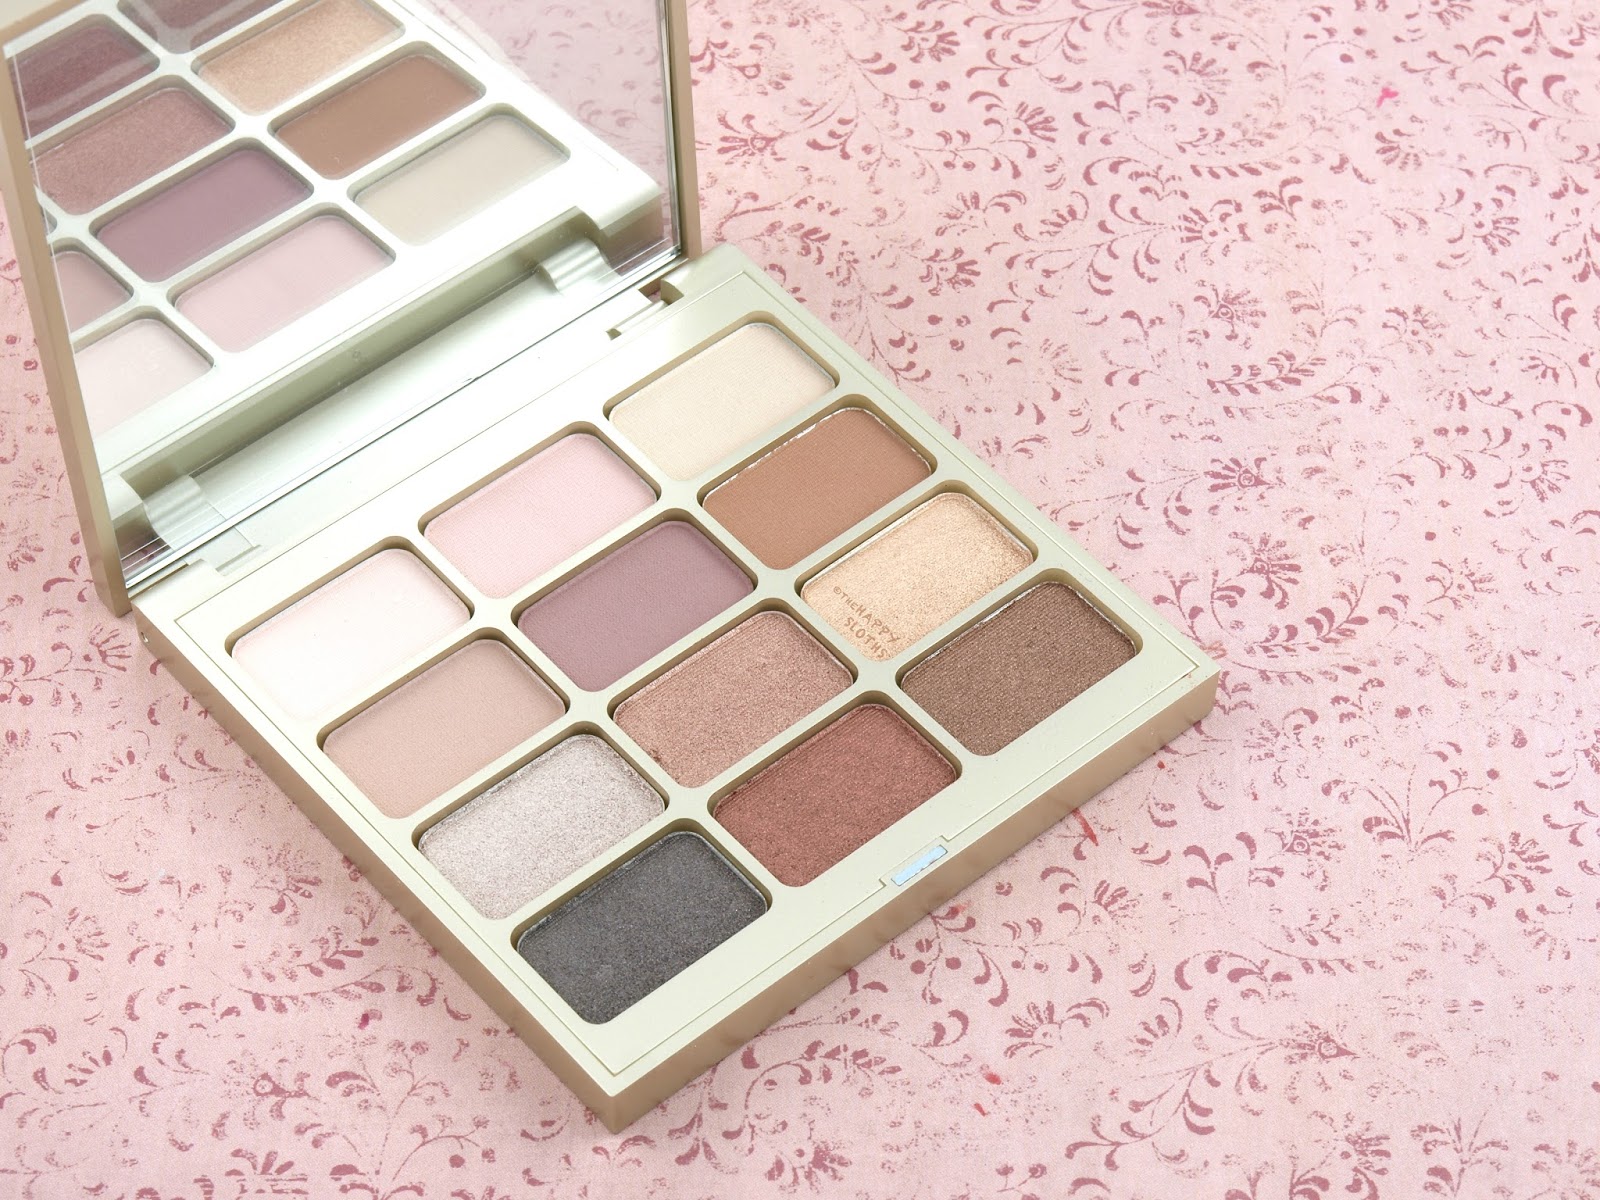 Disse Som agitation Stila Matte 'n Metal Eyeshadow Palette: Review and Swatches | The Happy  Sloths: Beauty, Makeup, and Skincare Blog with Reviews and Swatches